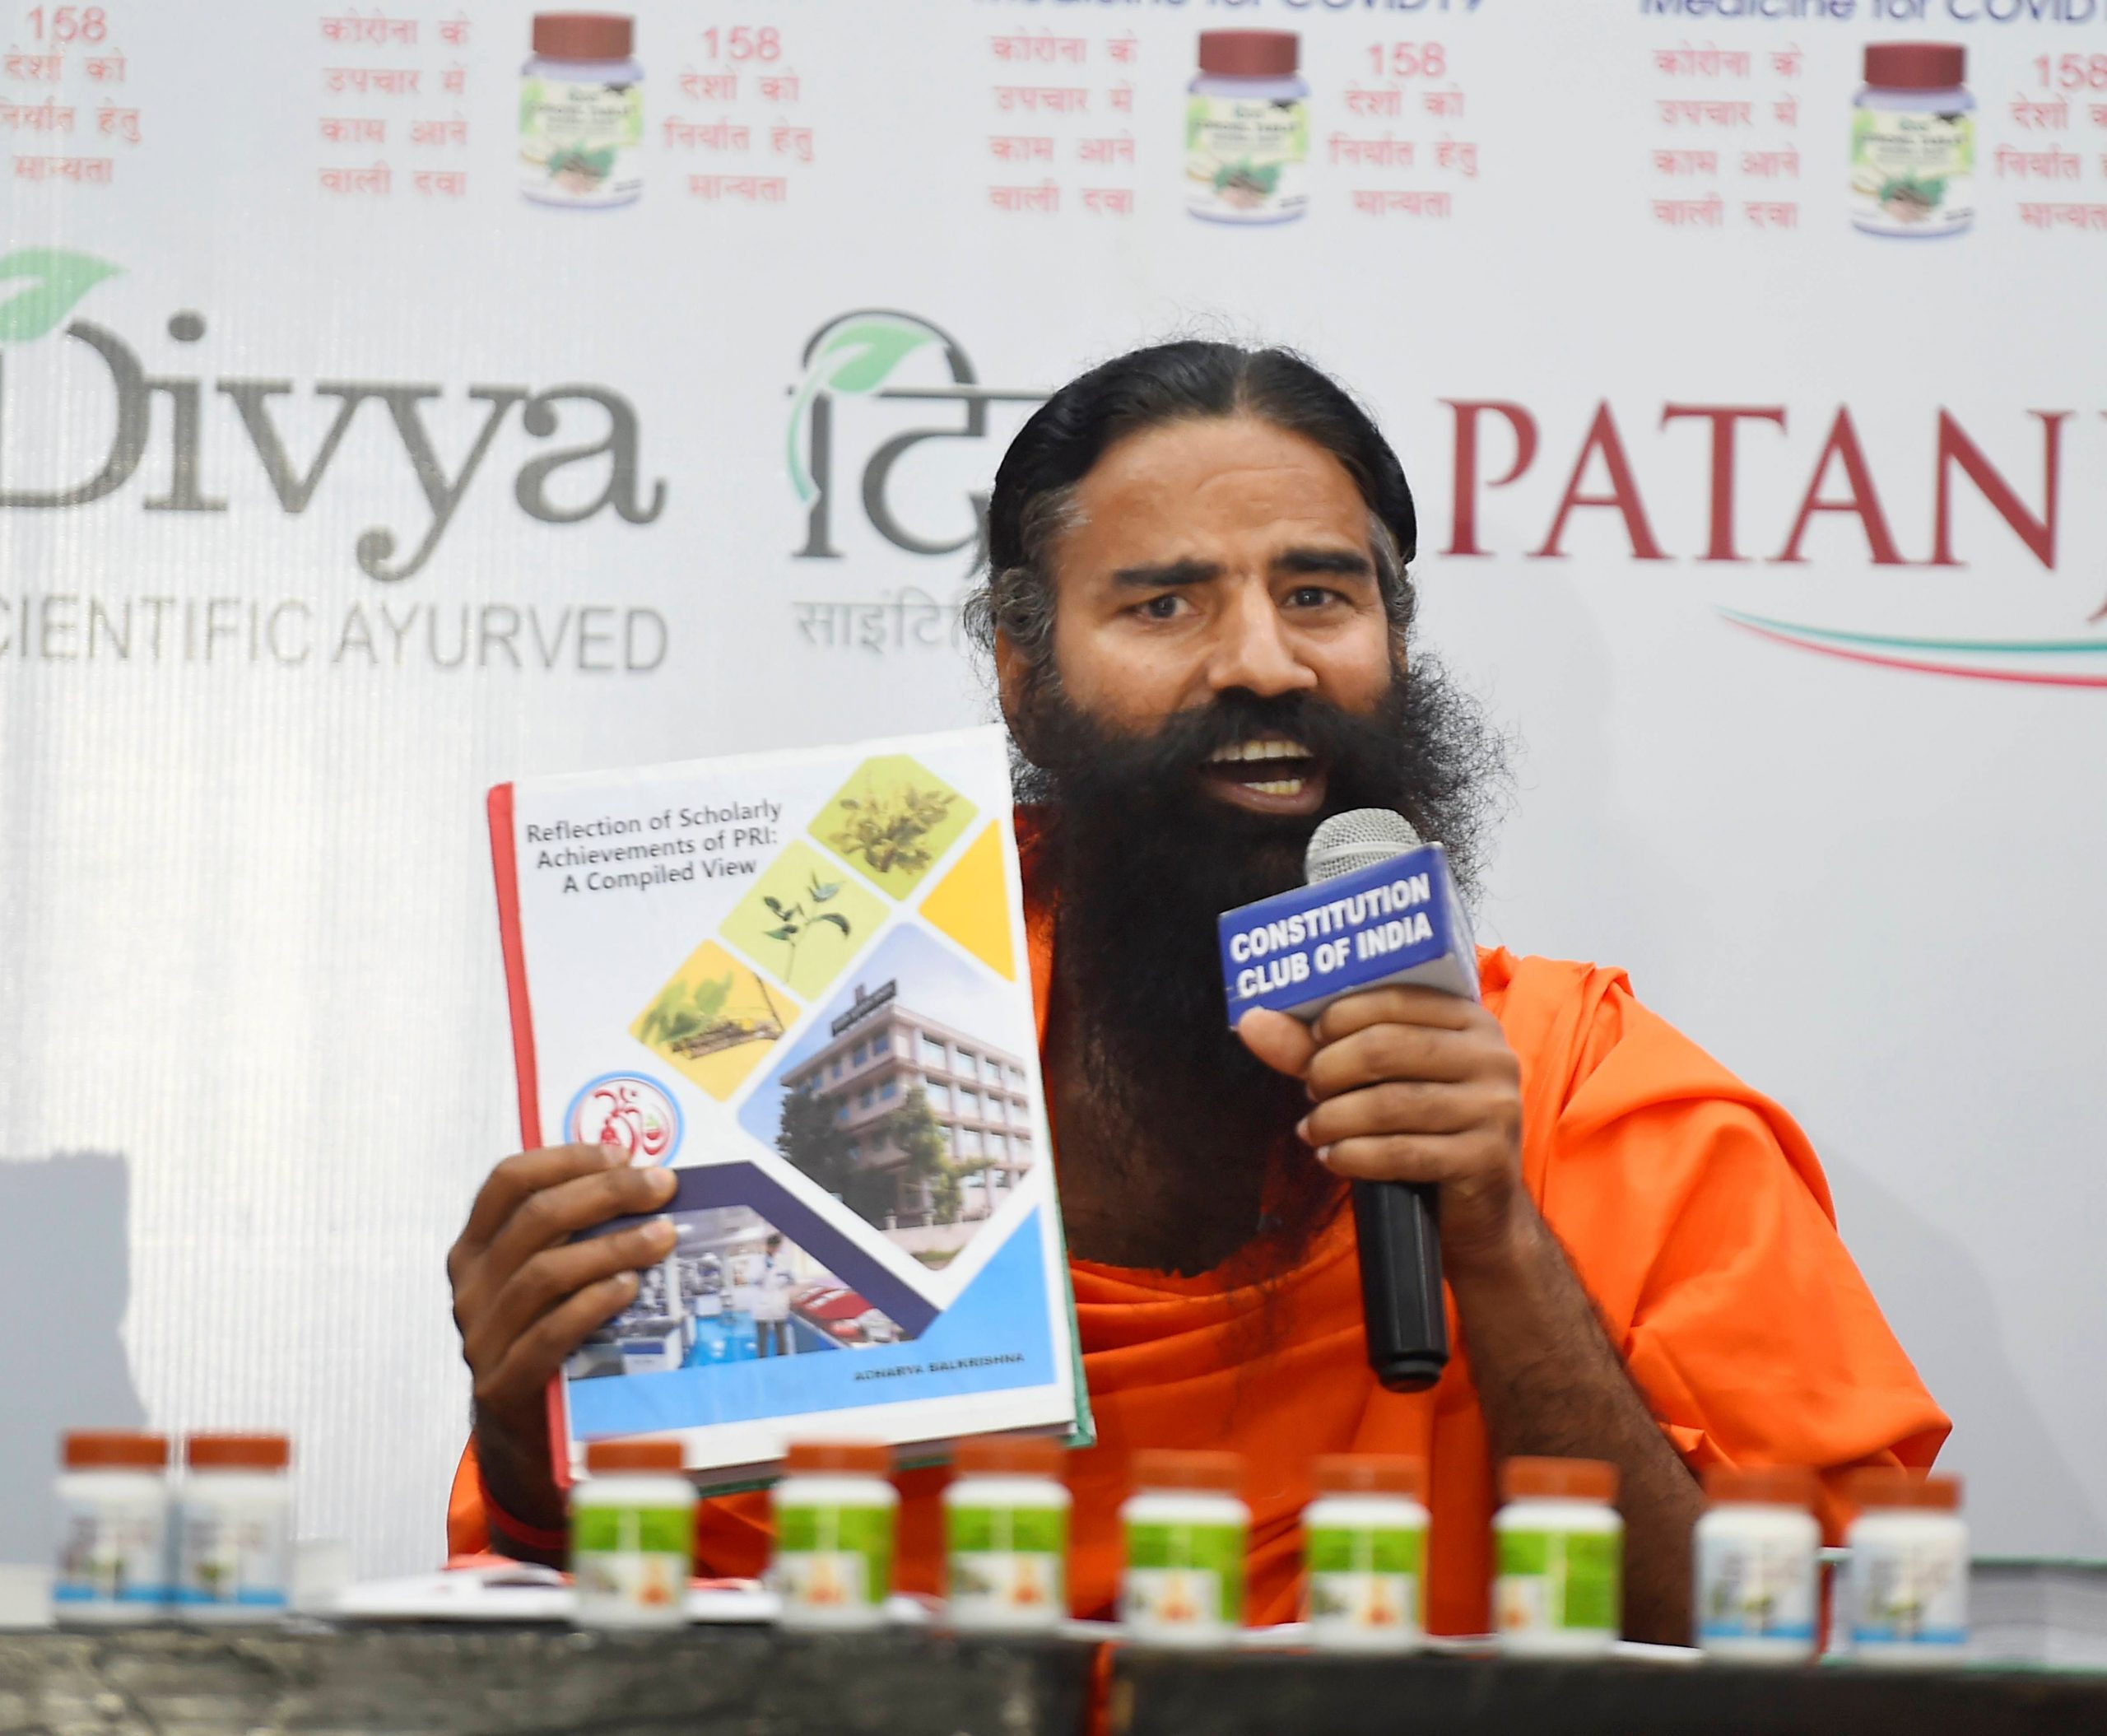 No COVID-19 cases in Patanjali campus, says Ramdev refuting reports